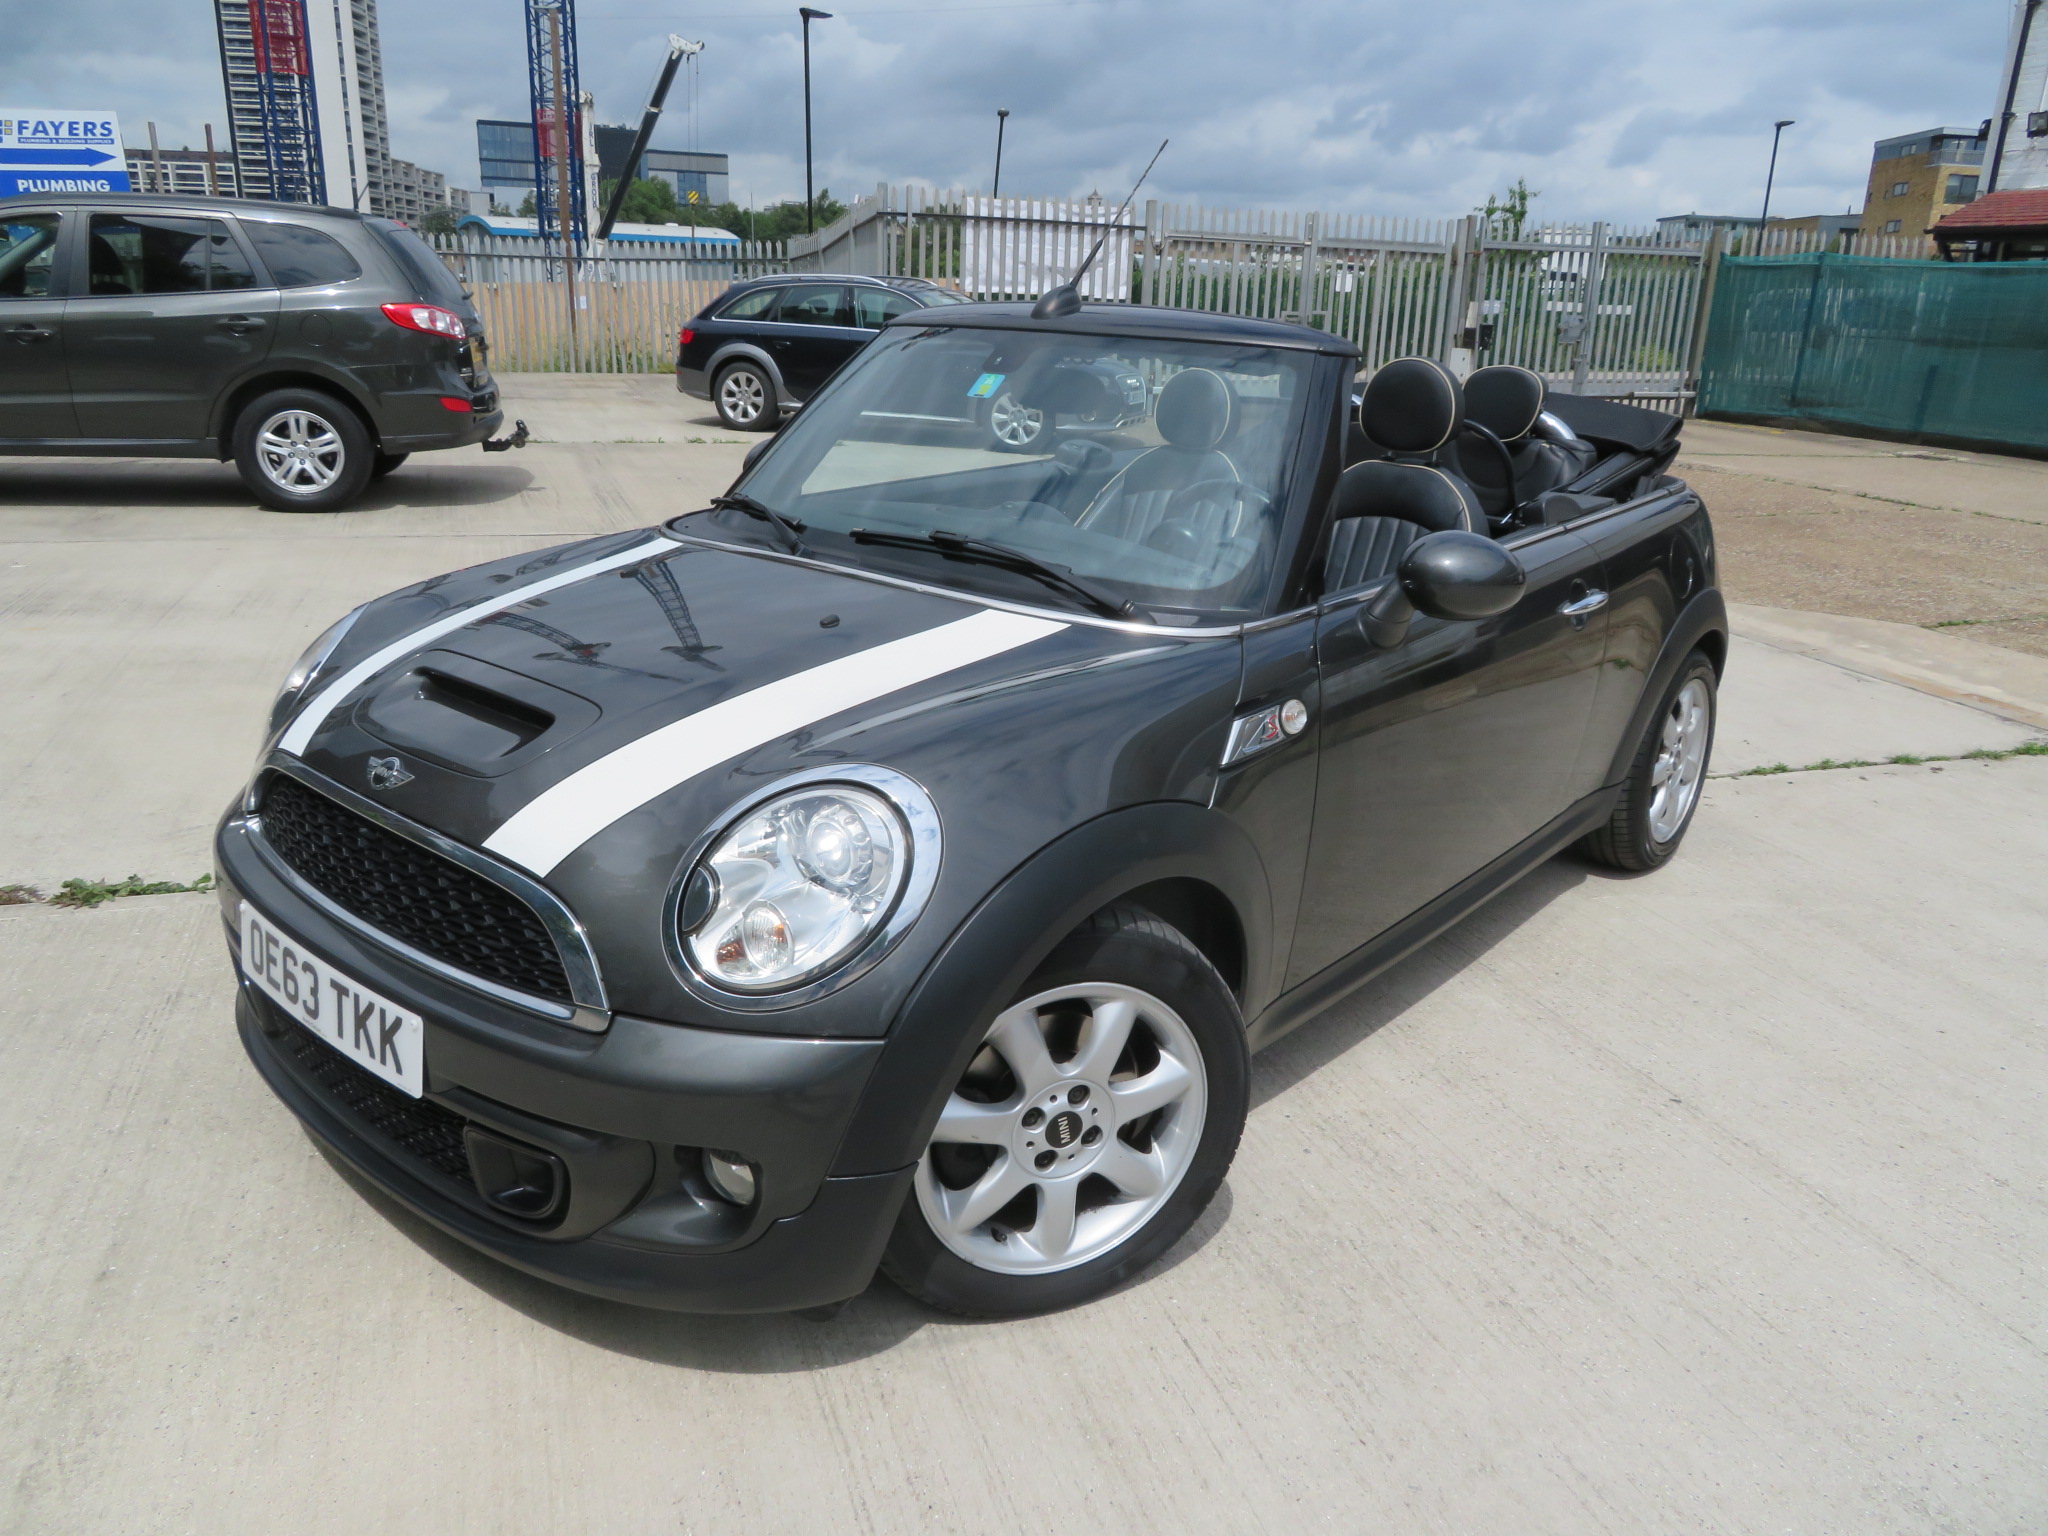 New & Used LHD Left Hand Drive Cars for Sale | London, UK